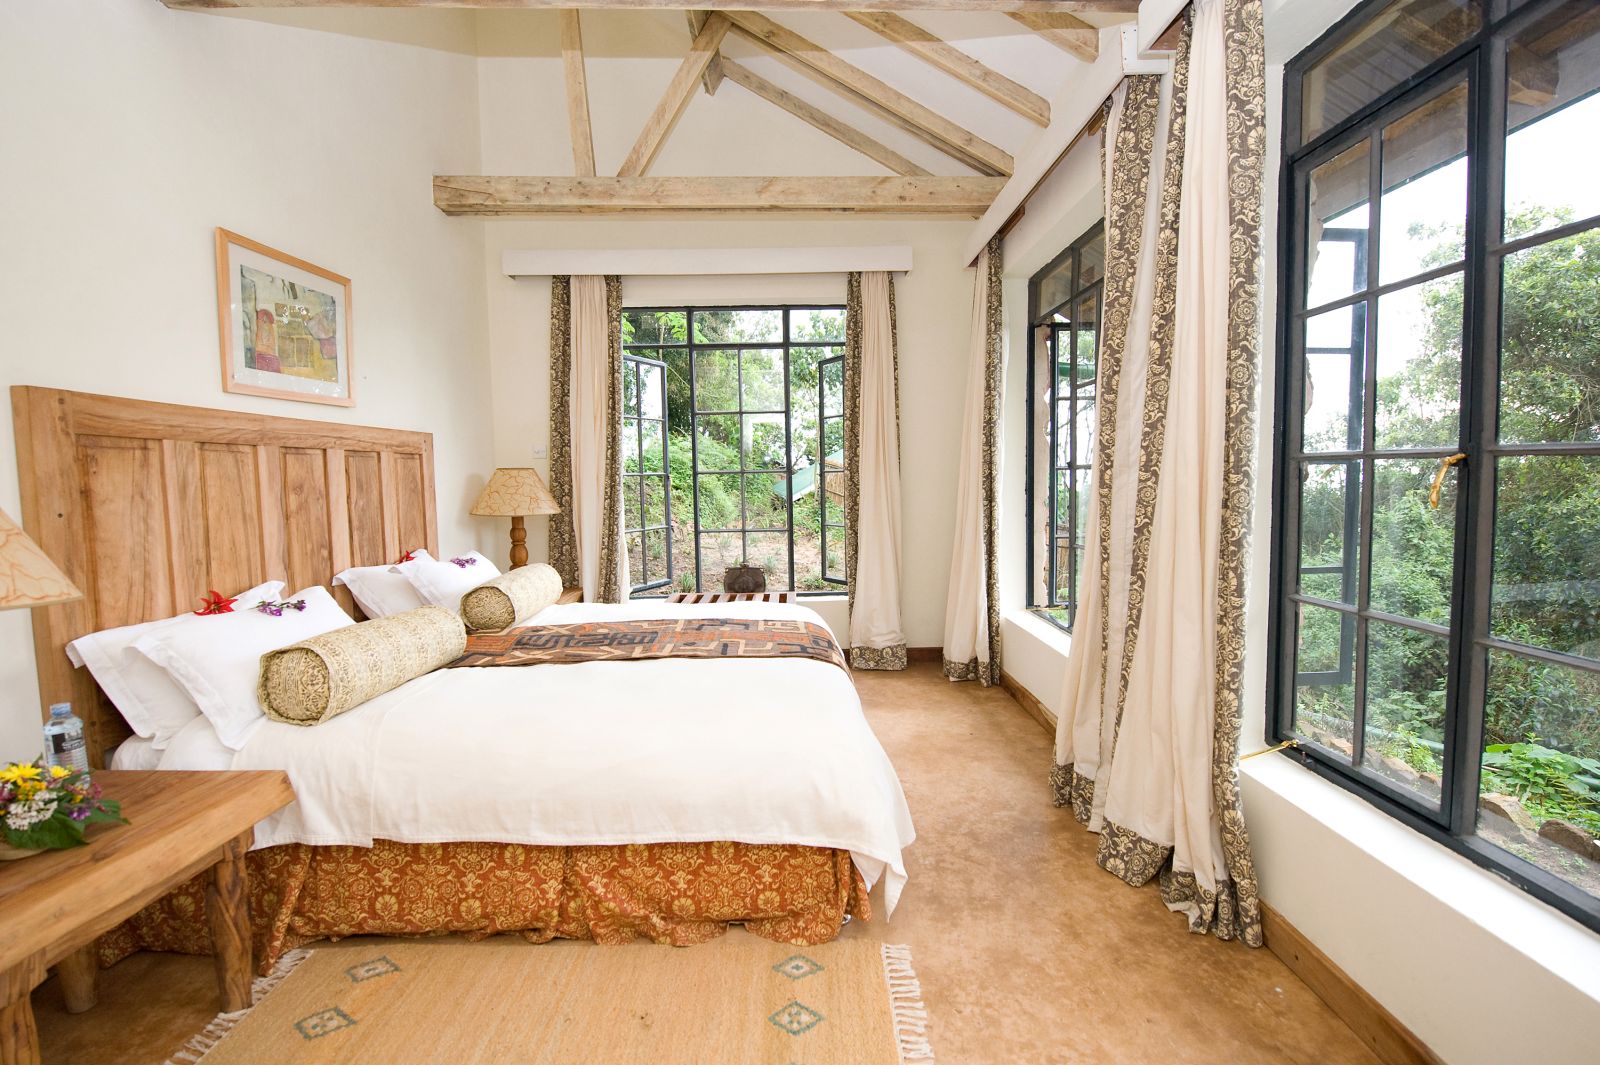 A bedroom with panoramic views from large windows at the foot of the bed at Clouds Mountain Gorilla Lodge in Uganda